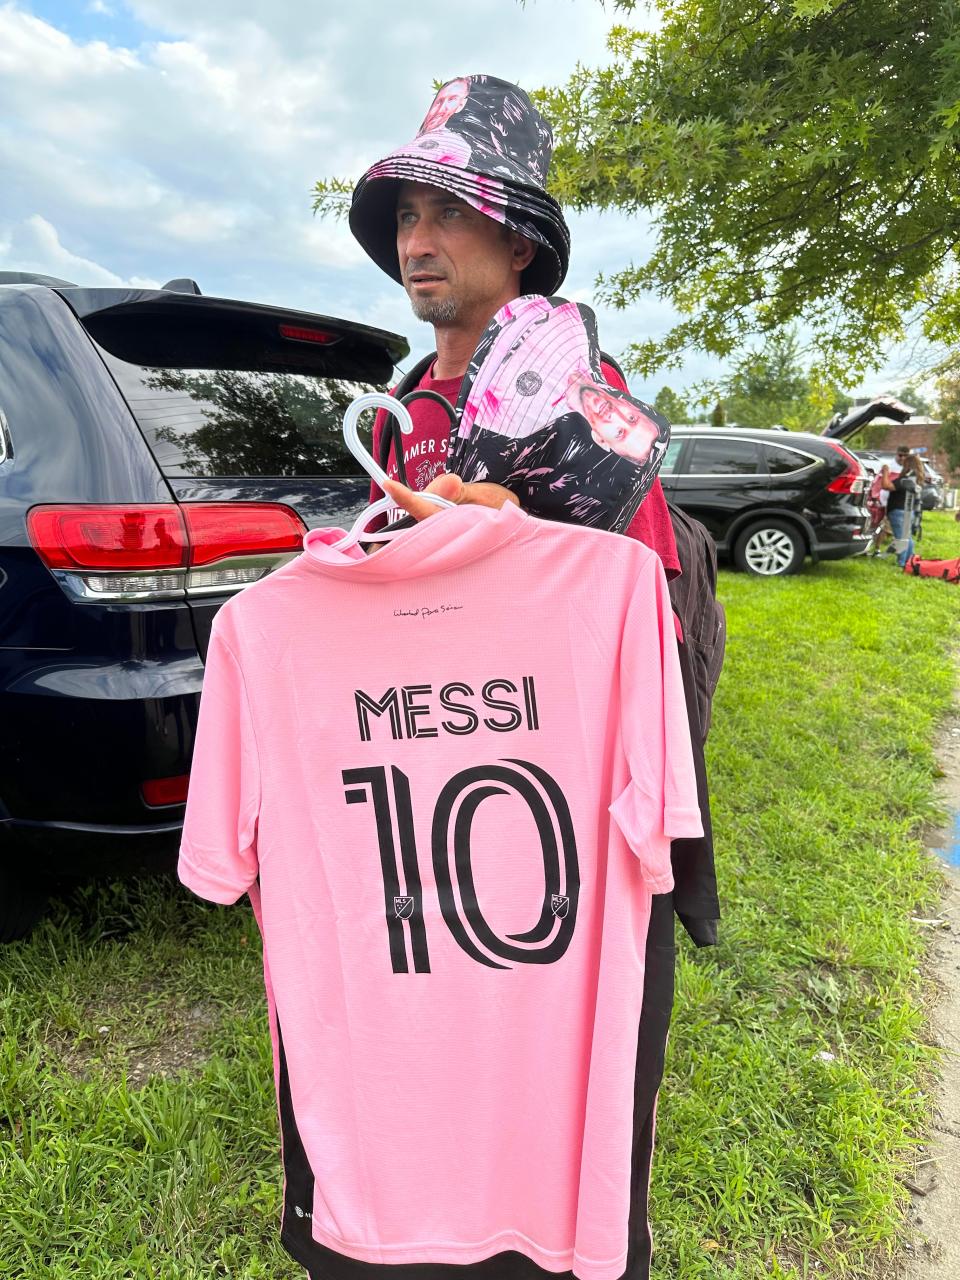 A street vendor near Subaru Park in Chester, Pennsylvania sells Lionel Messi merchandise prior to an Aug. 15 match between Inter Miami CF and Philadelphia Union.